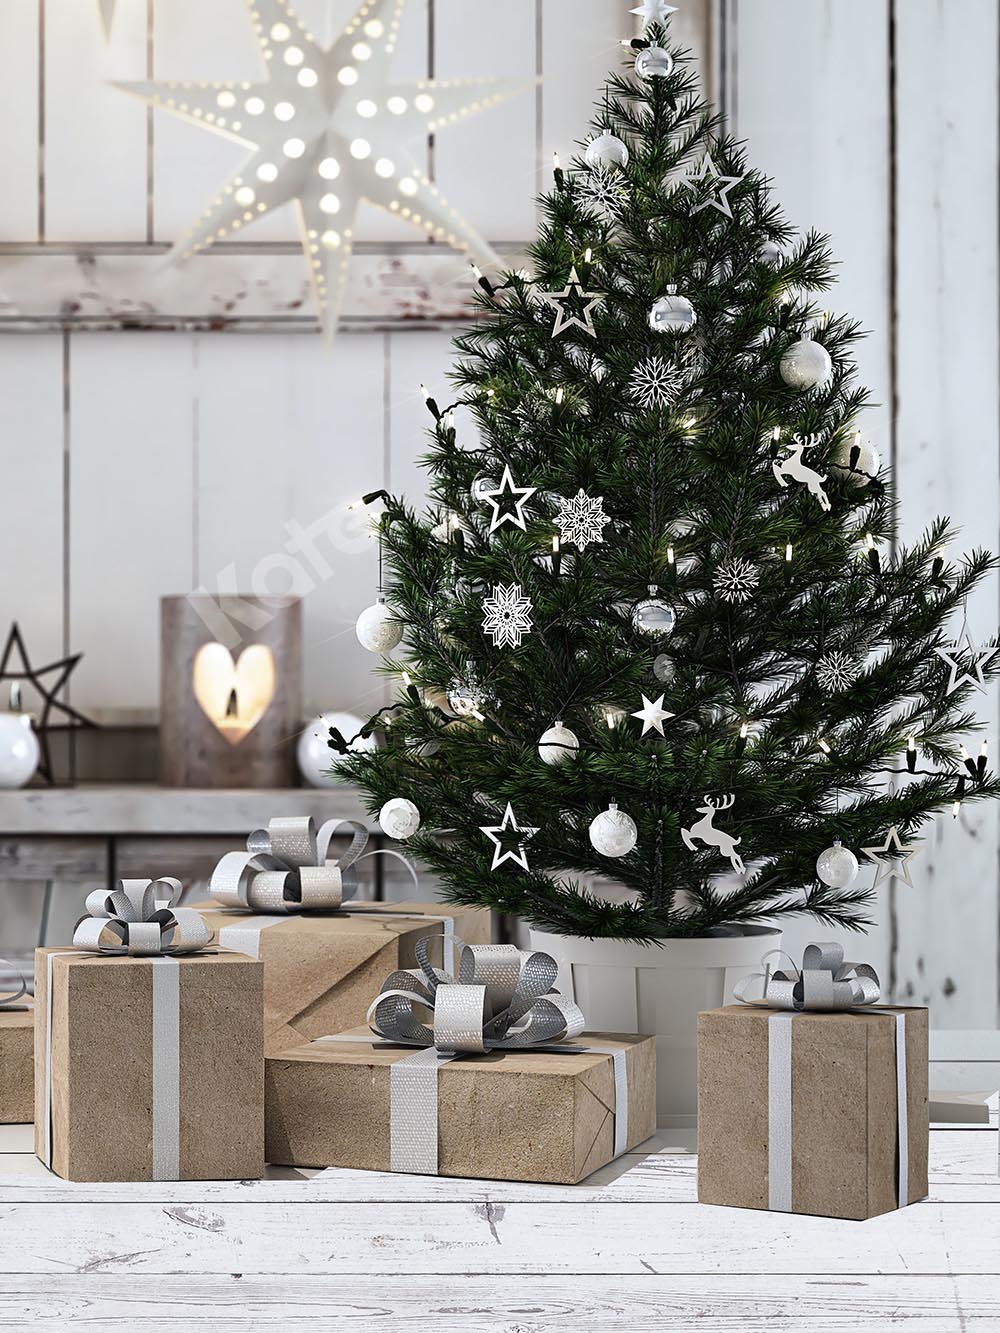 Kate Gifts Christmas Tree Backdrop Designed by Chain Photography